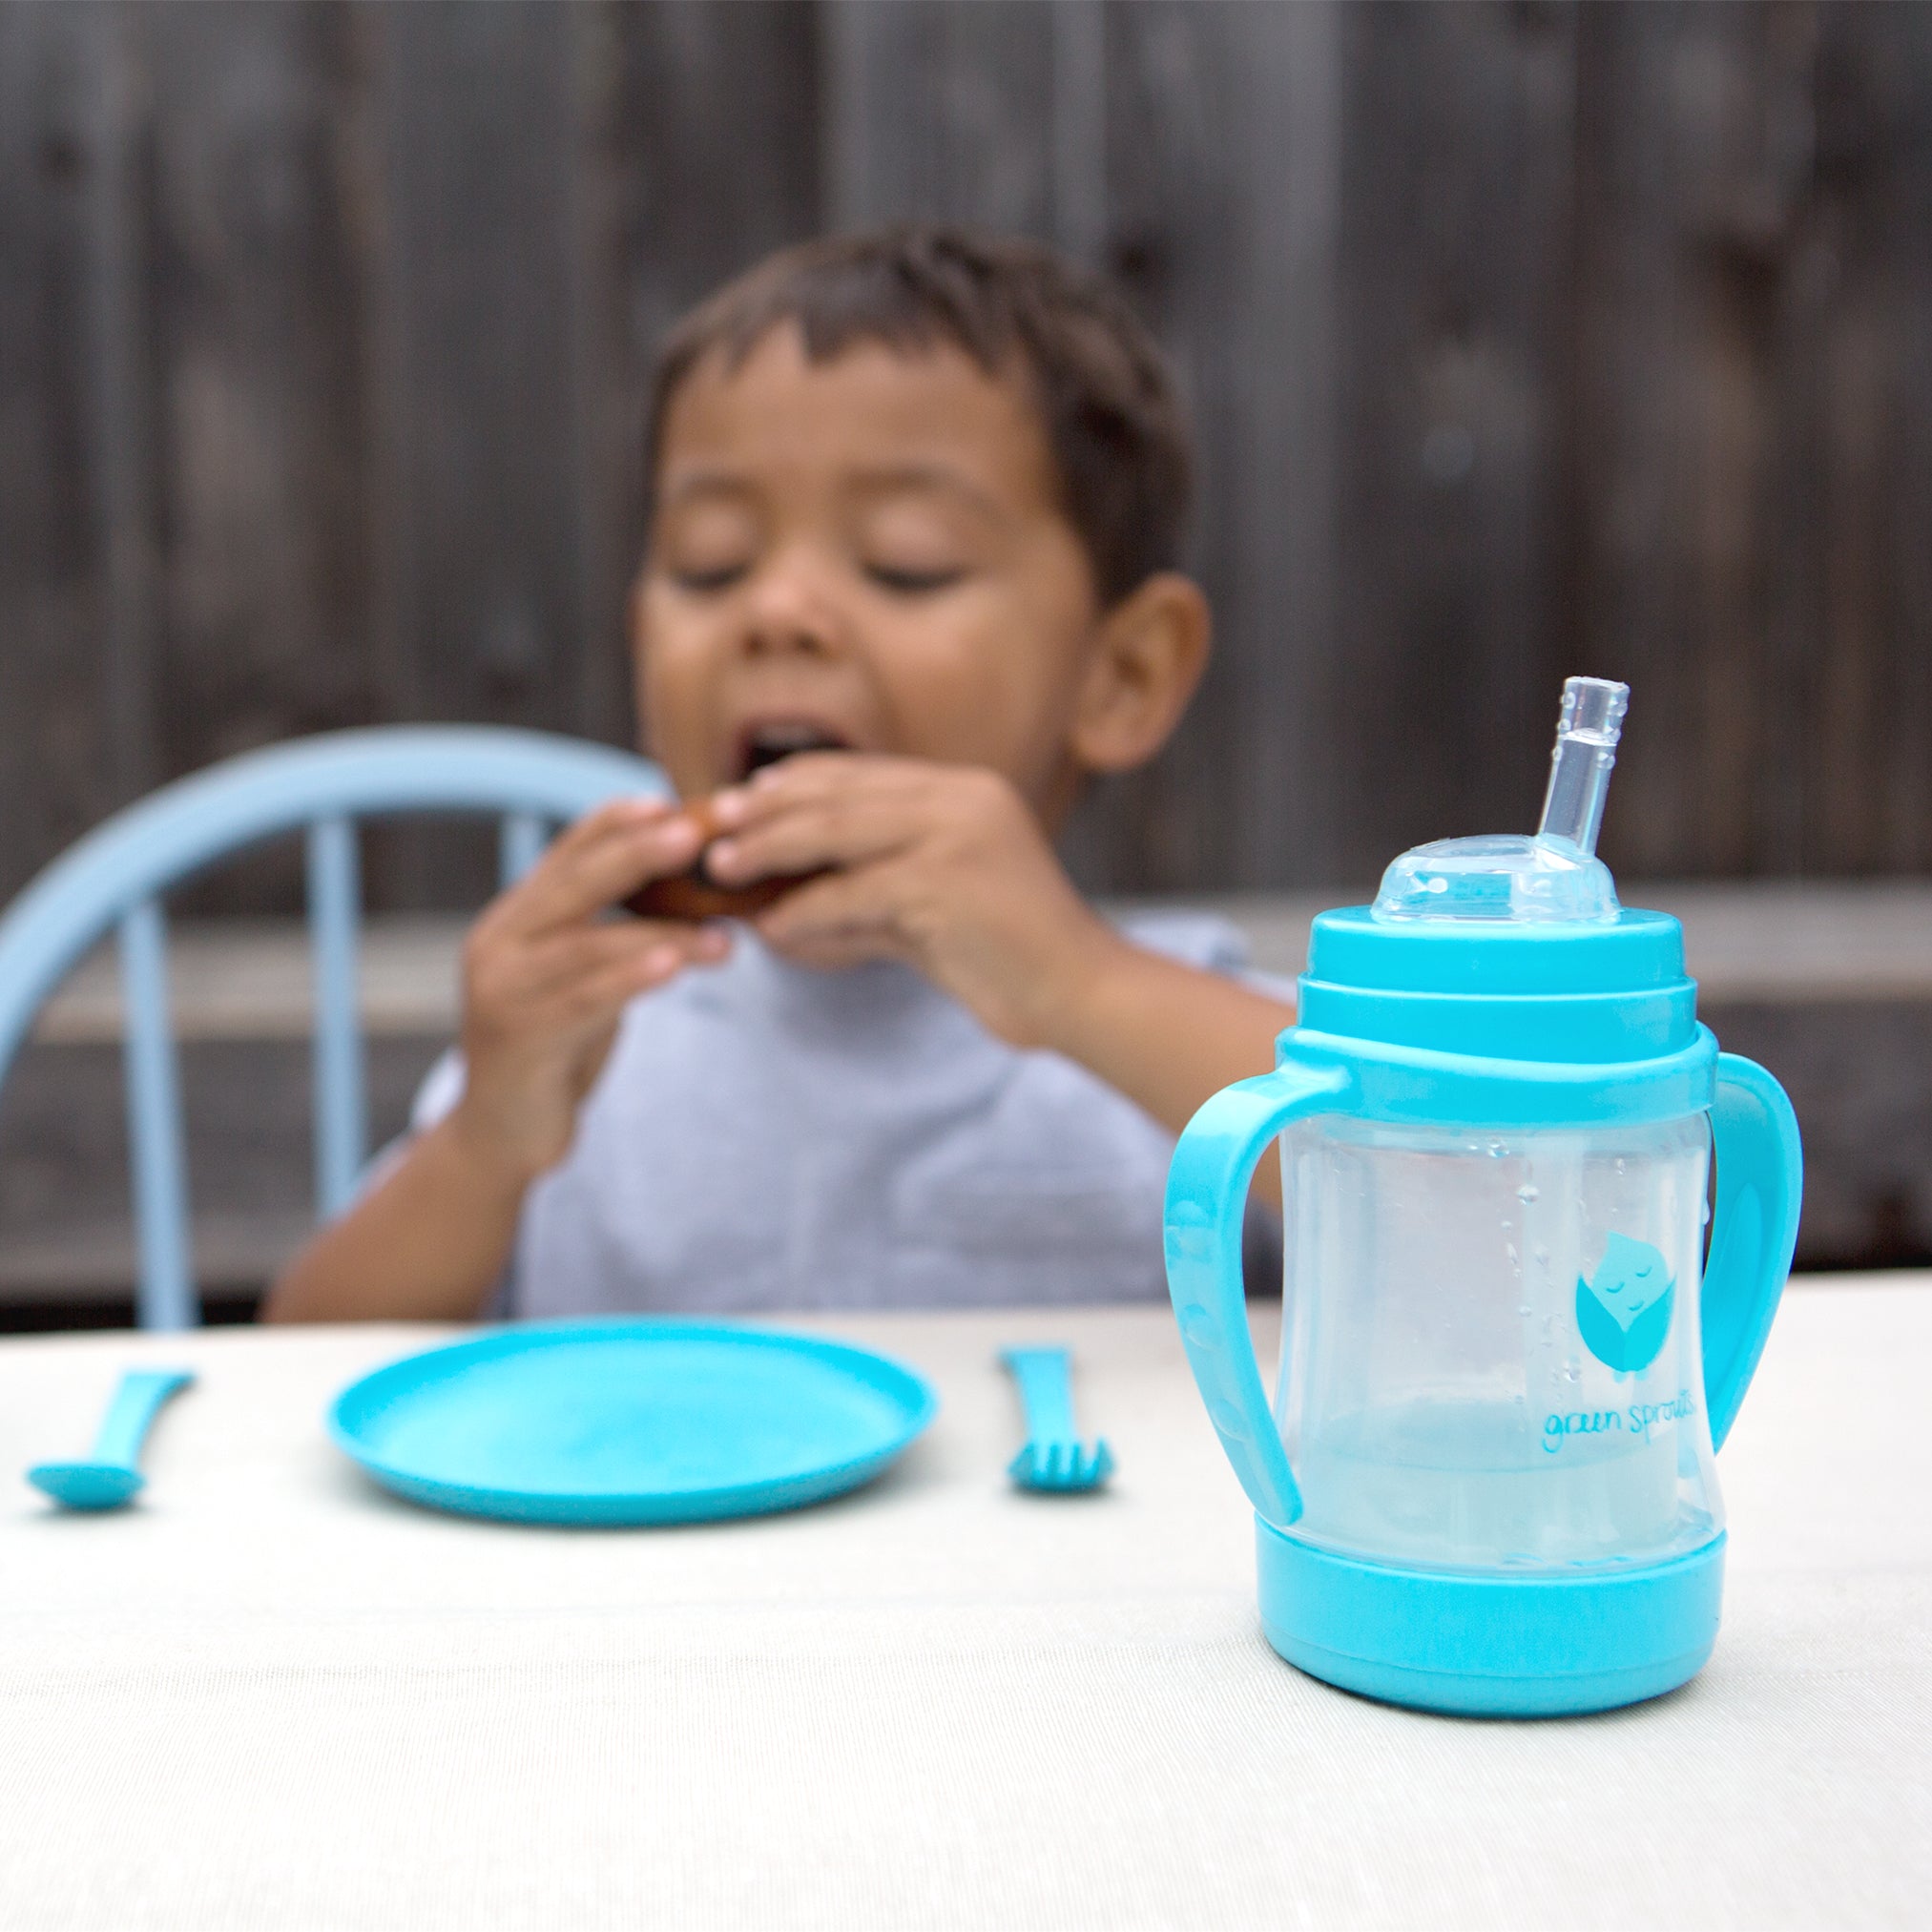 Straw Spouts and Straws for Bottles and Cups (2 Pack)